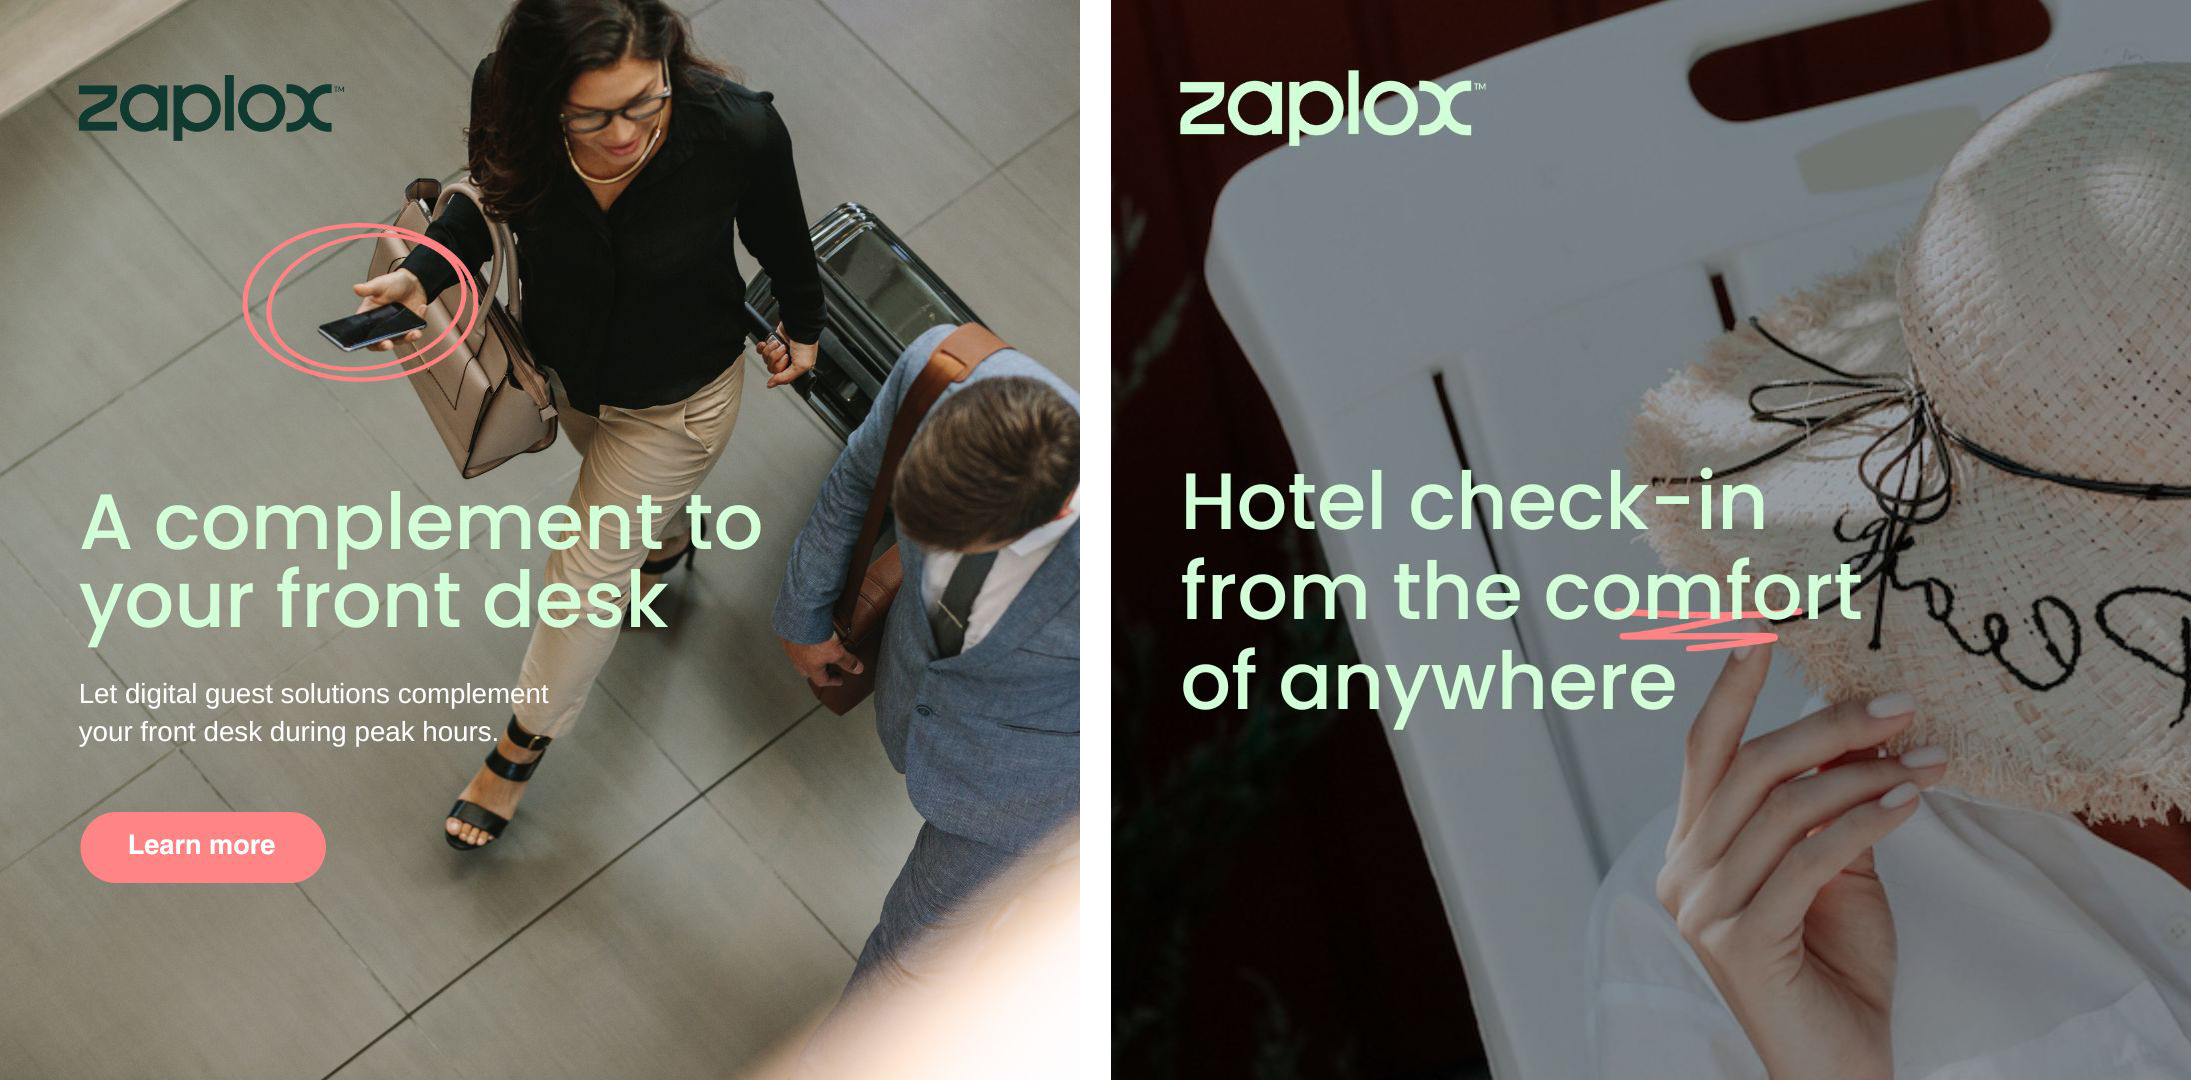 zaplox a complement to hospitality